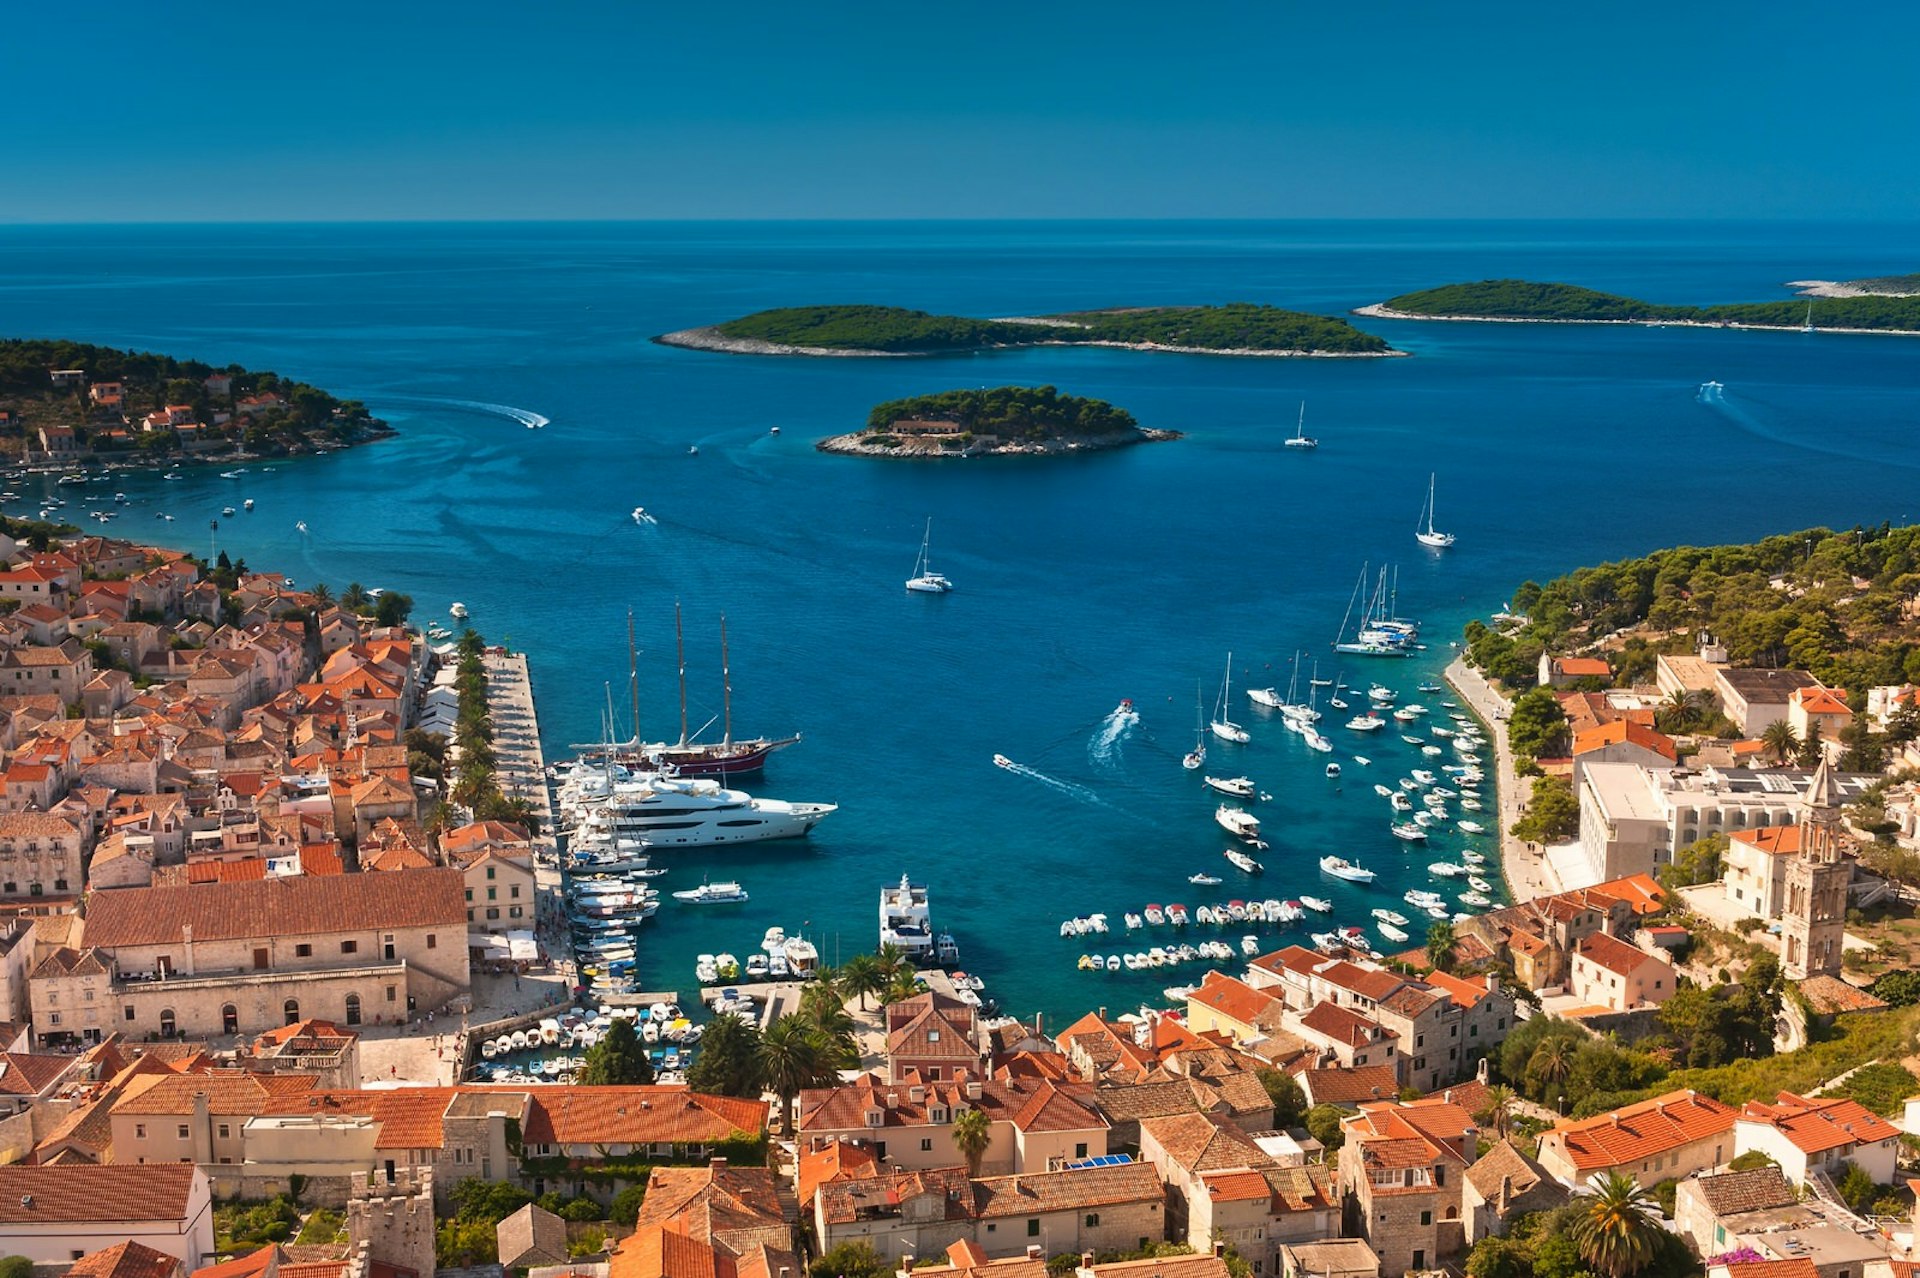 A view from above of Hvar Town's square harbour, with the Pakleni Islands in the distance © Evgeniya Moroz / Shutterstock